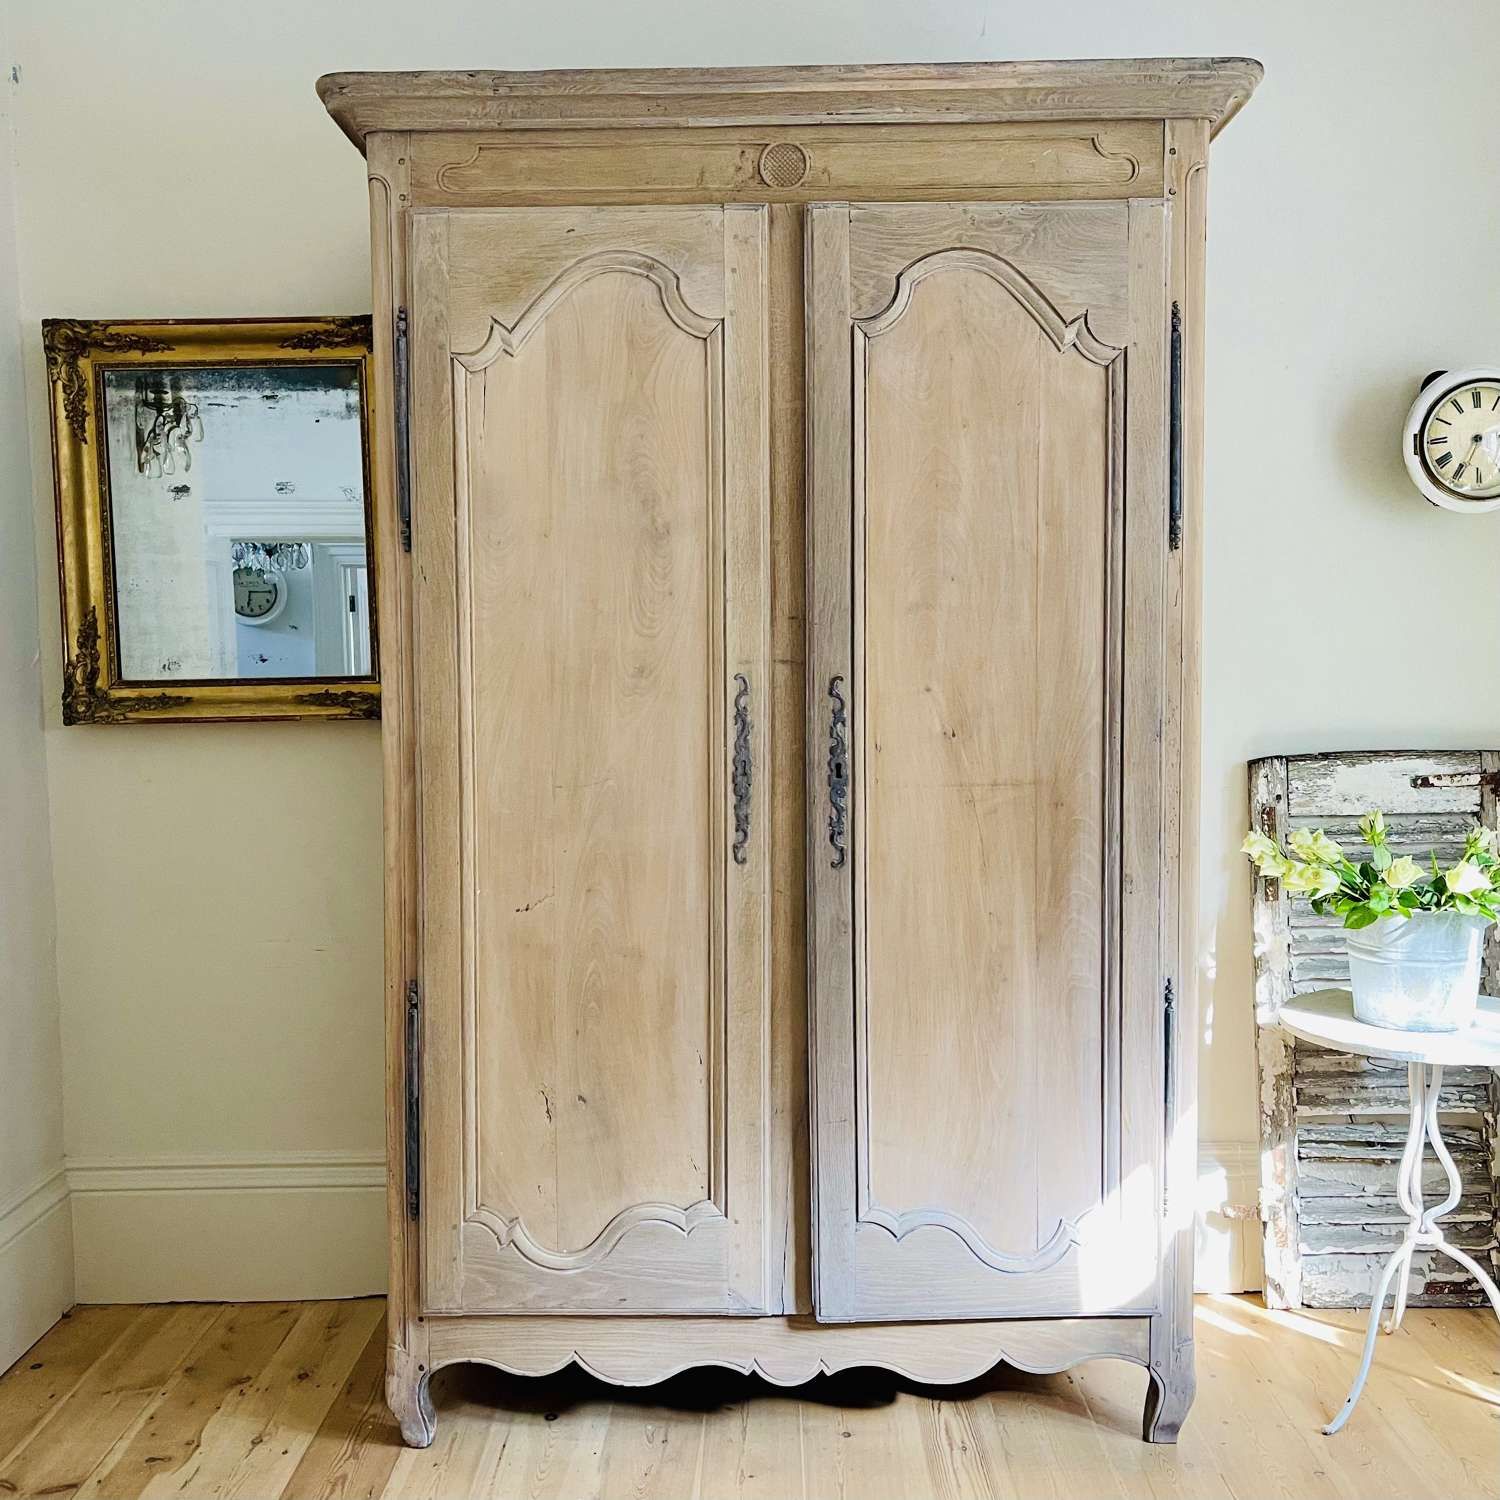 19th Century French Oak Armoire Wardrobe With Hanging Rail Regarding French Style Armoires Wardrobes (View 14 of 15)